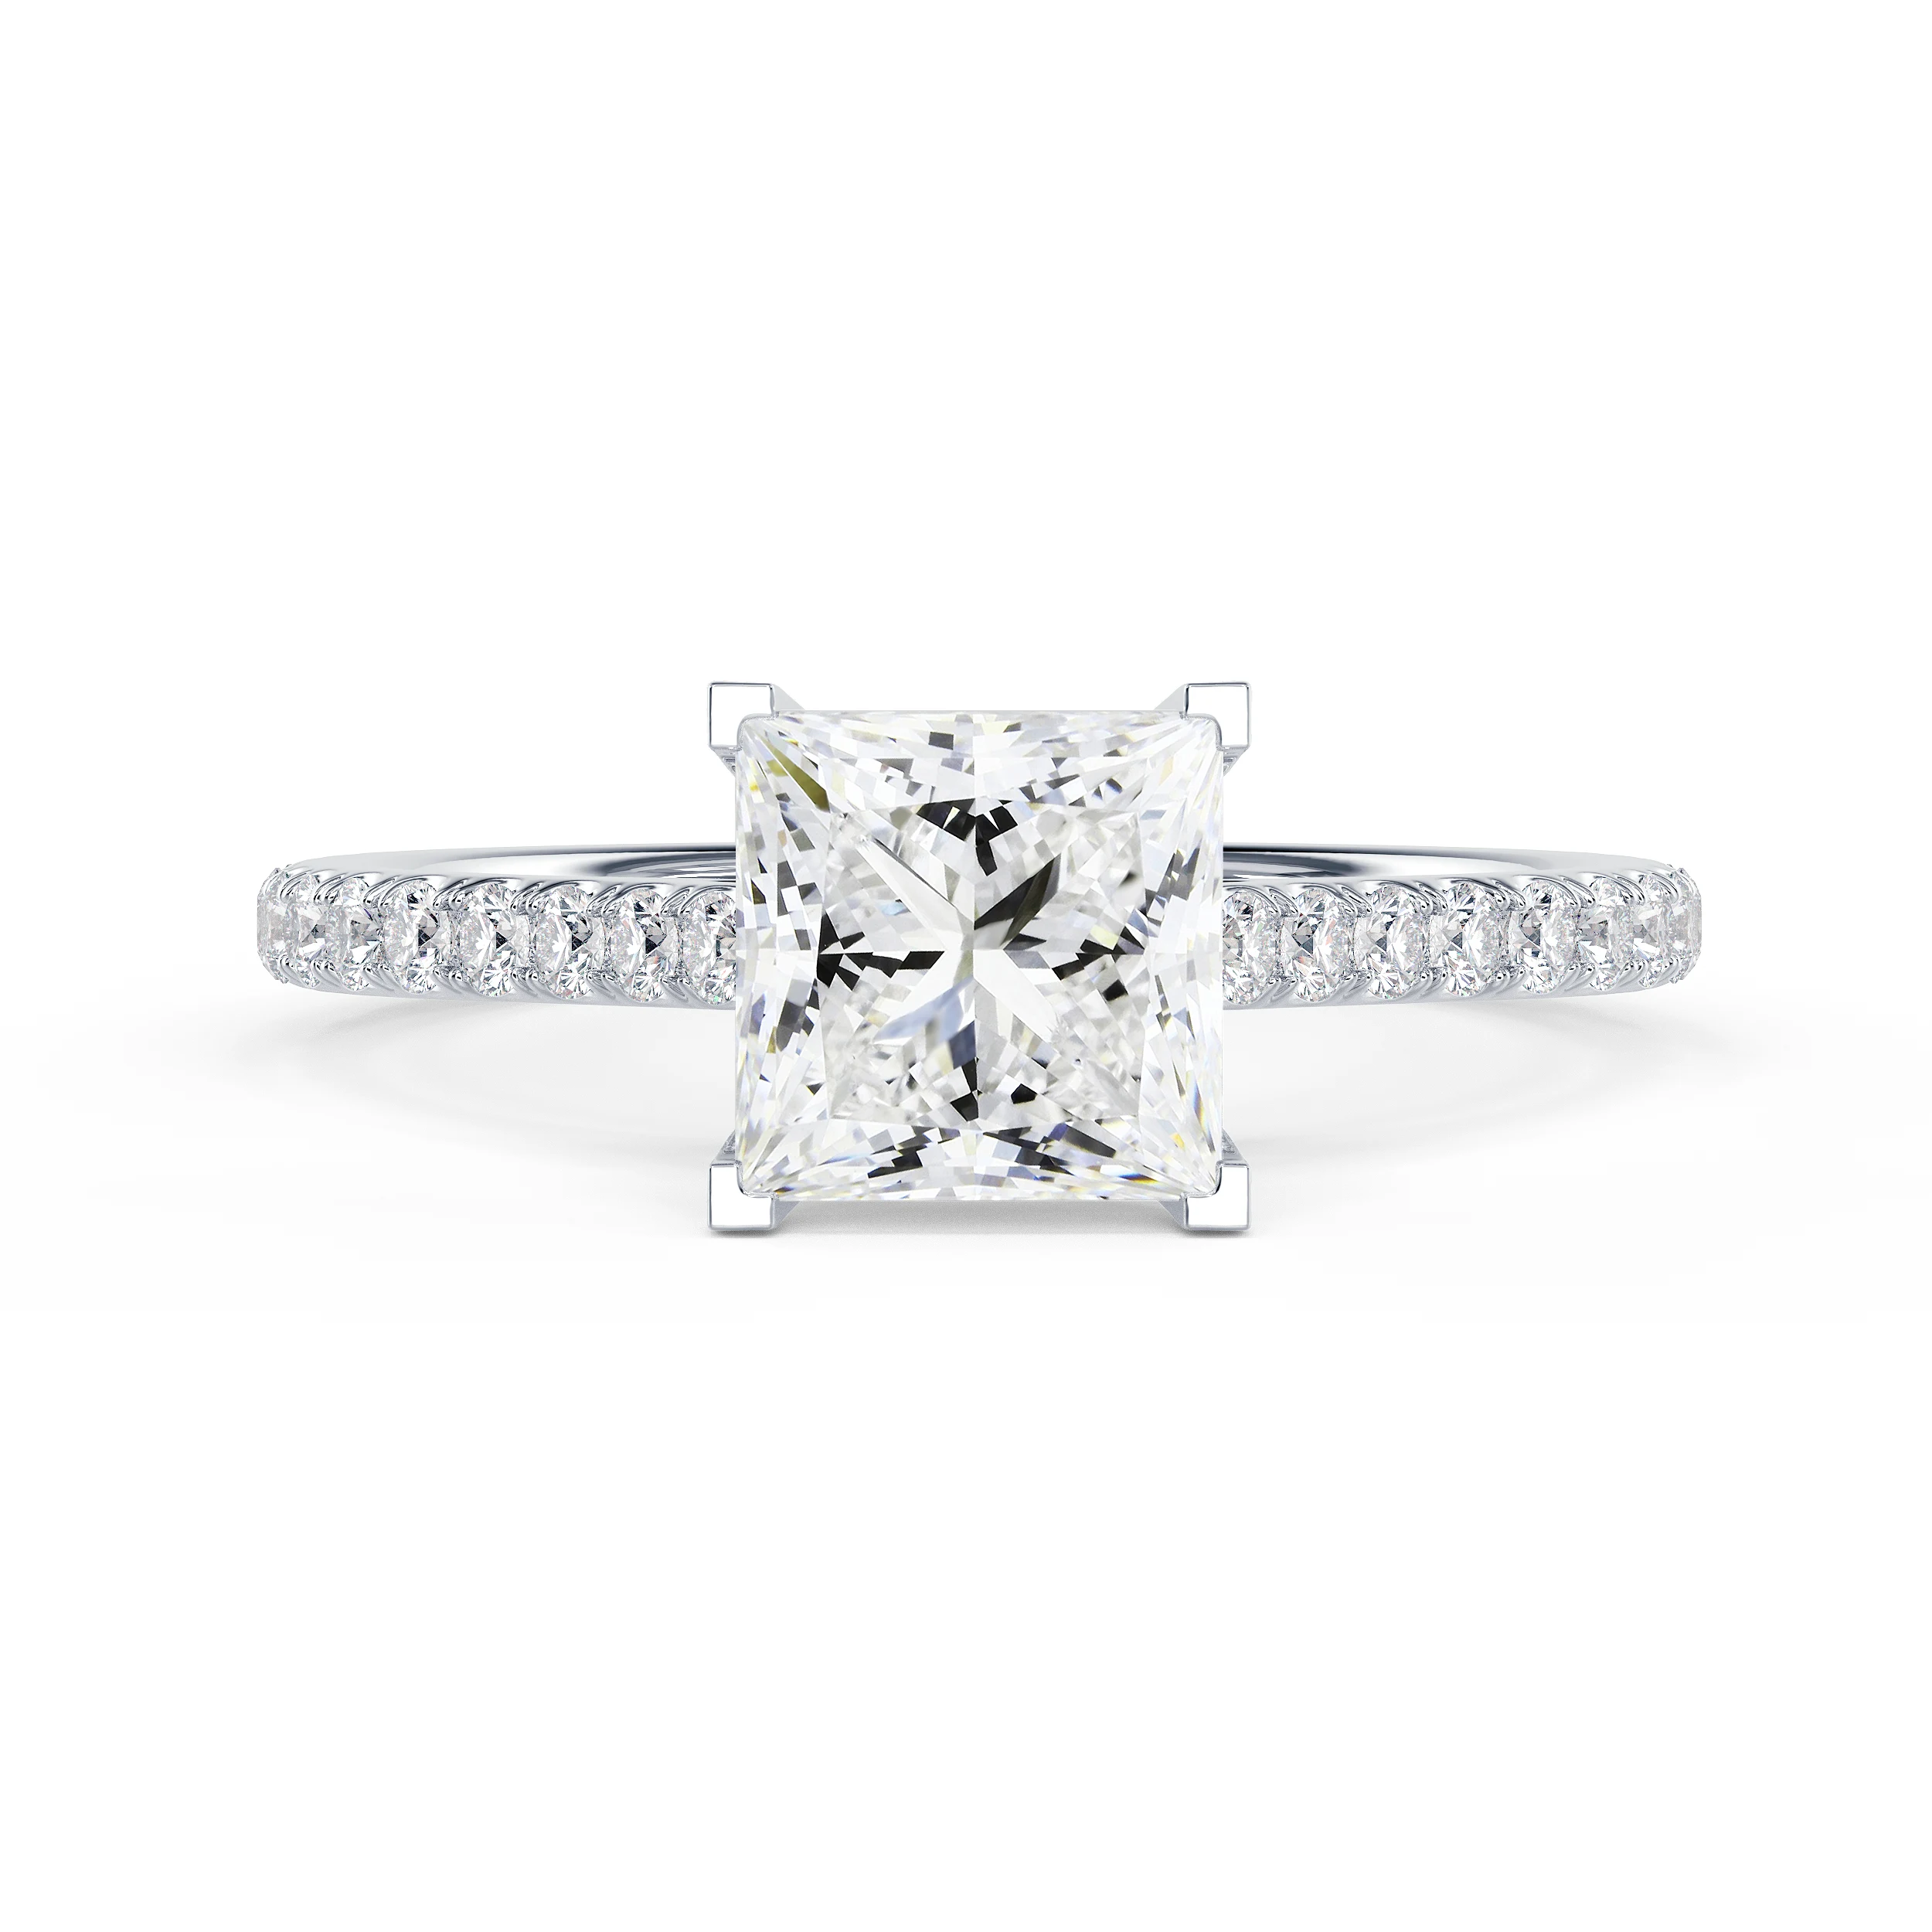 White Gold Princess Cathedral Pavé Setting featuring Diamonds (Main View)